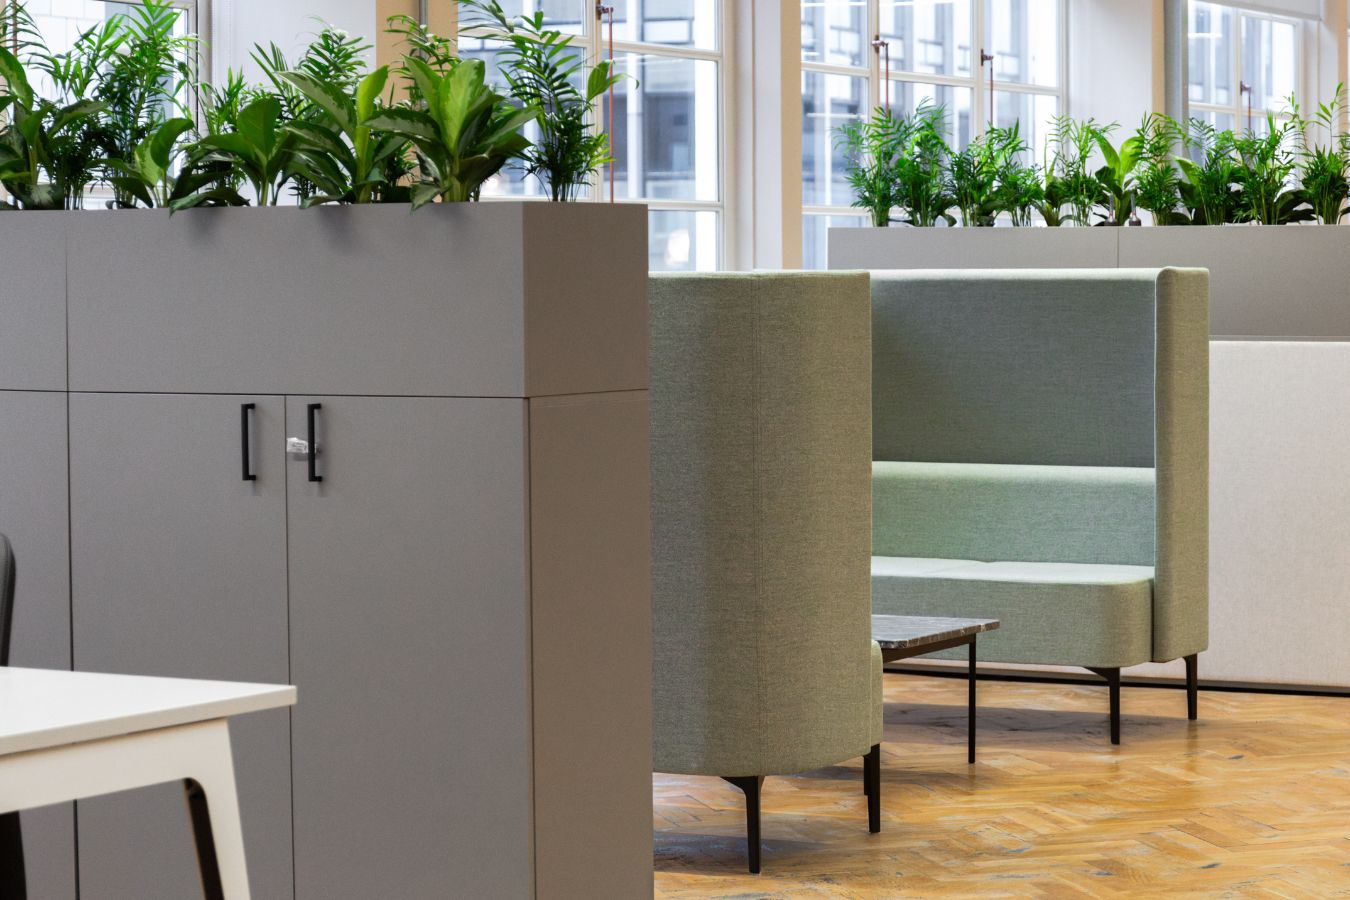 Privacy breakout booths for collaboration in biophilic office with wooden flooring